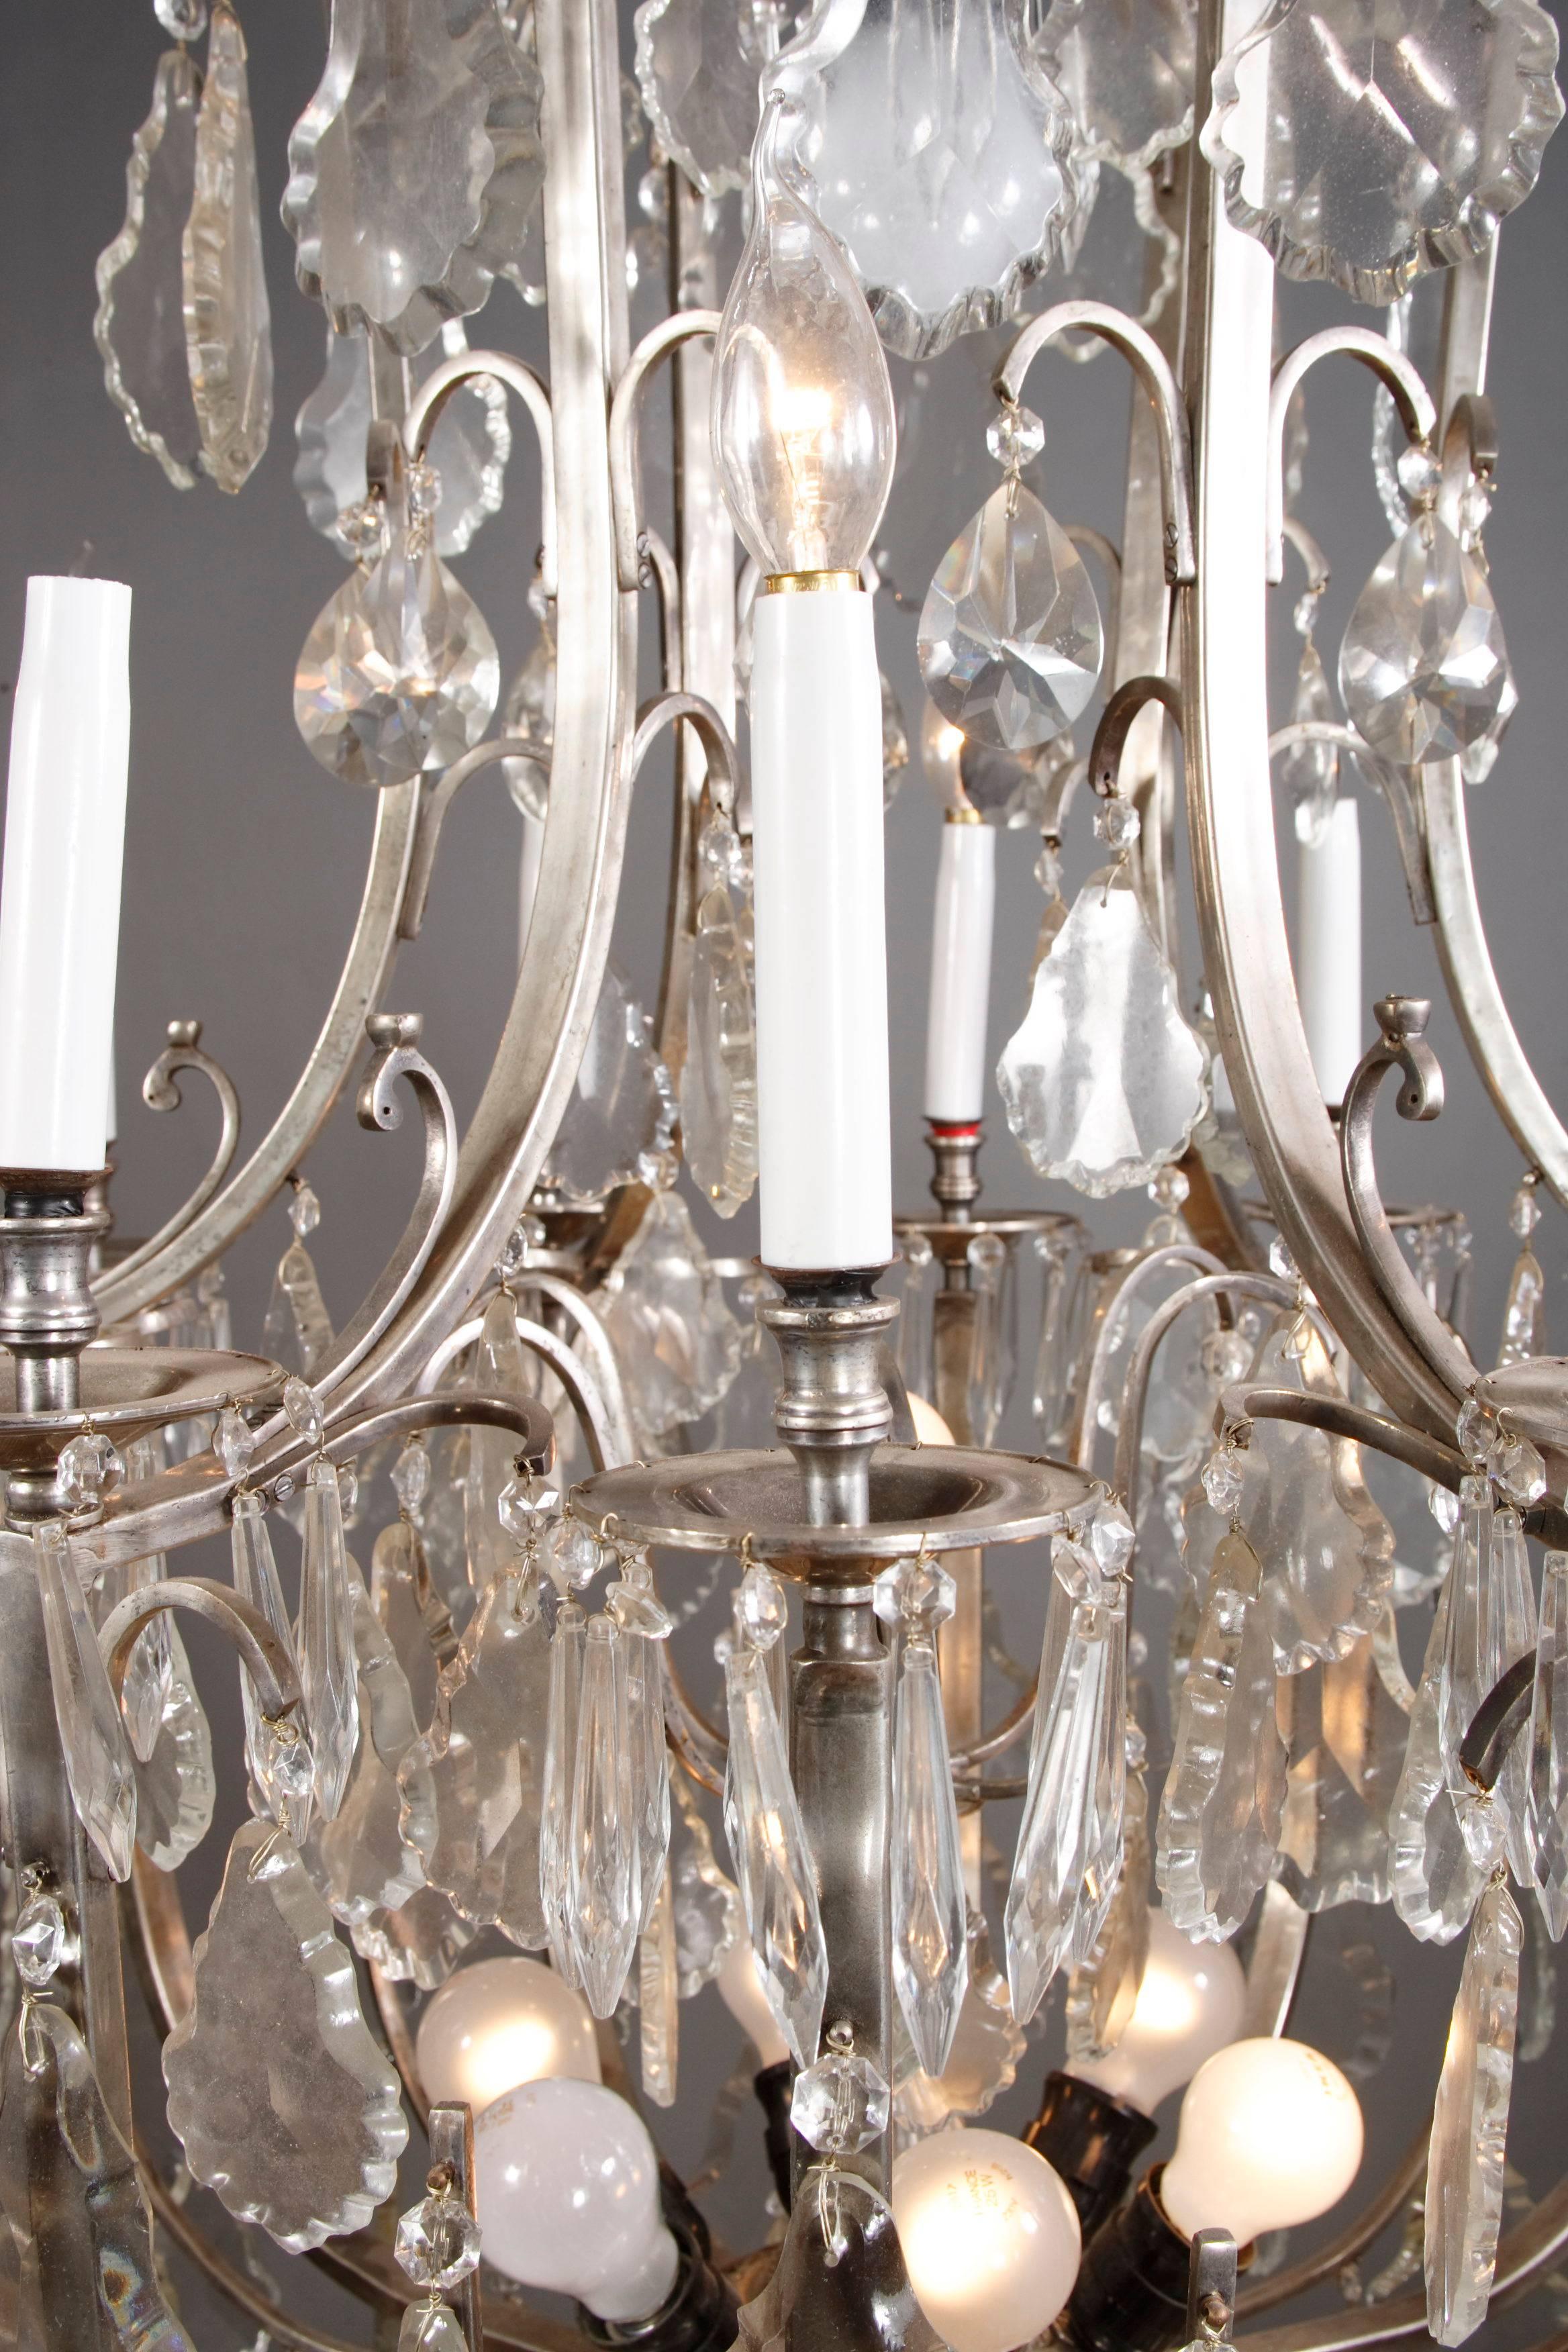 Large French chandelier.
Brass, silvered. Finely ground crystal. 12 curved light arms.

(F-Hud-1-si).